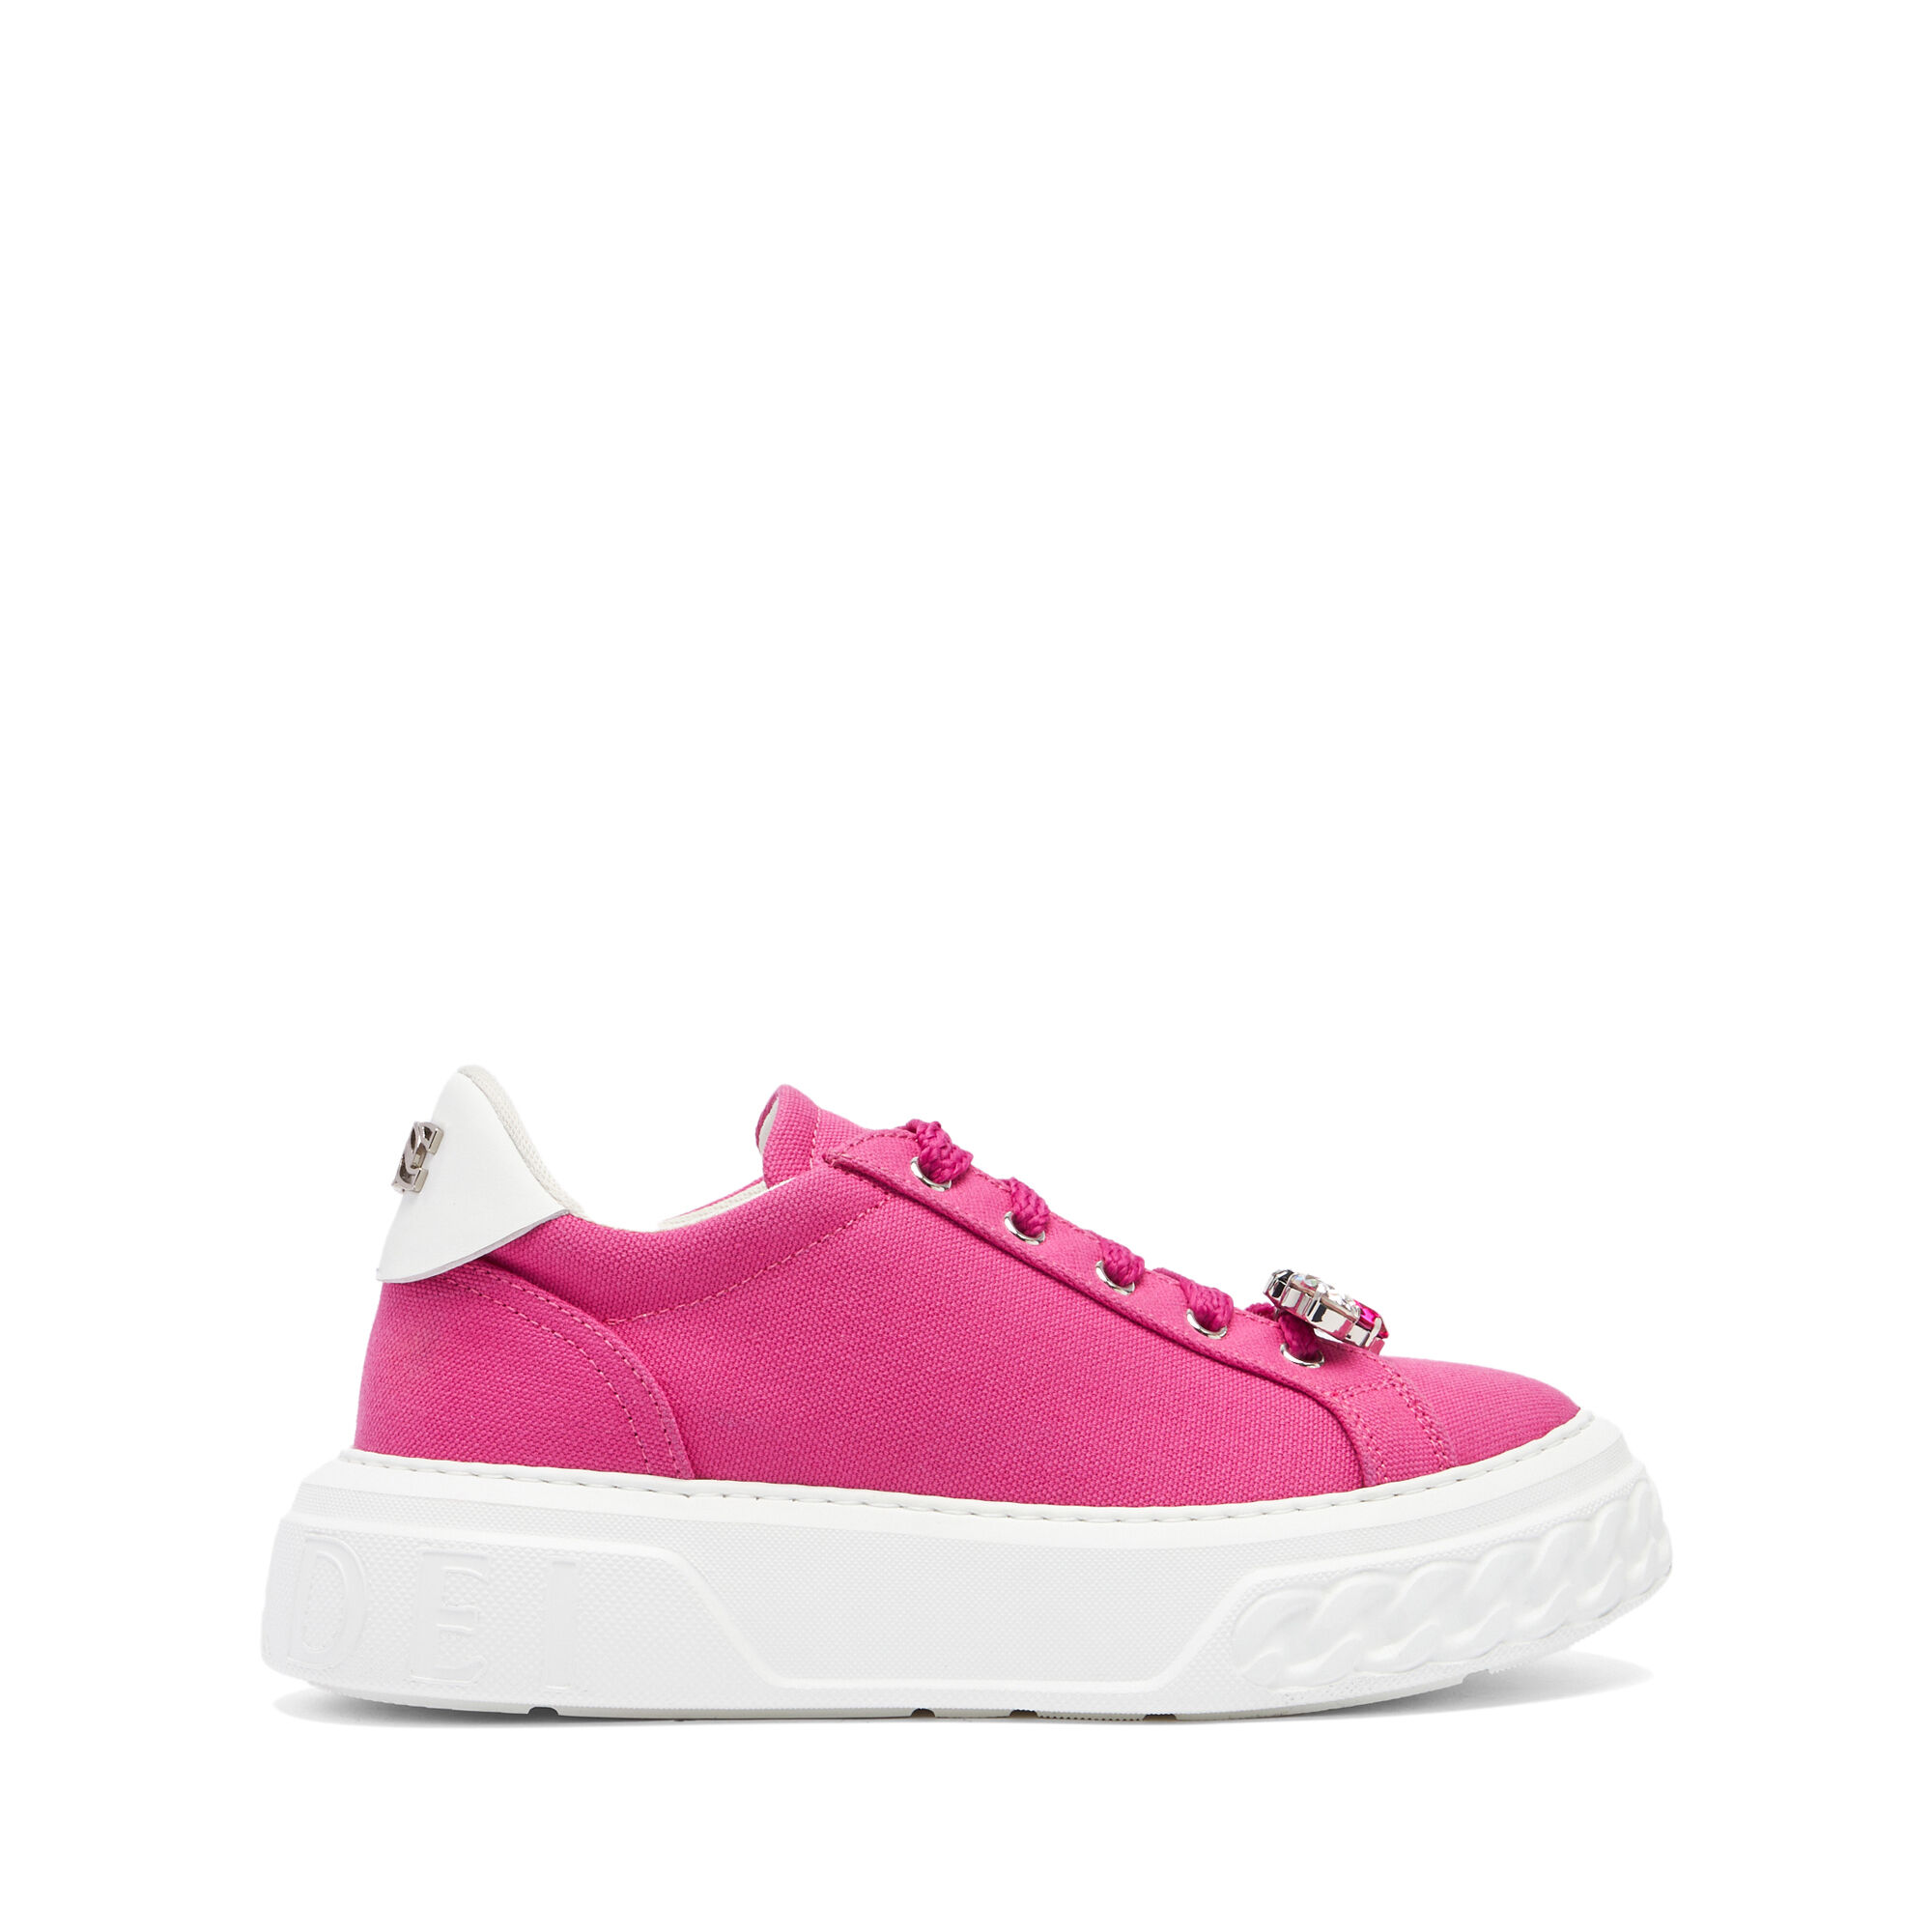 Off Road Queen Bee Sneakers Sneakers in Fuchsia and White for 